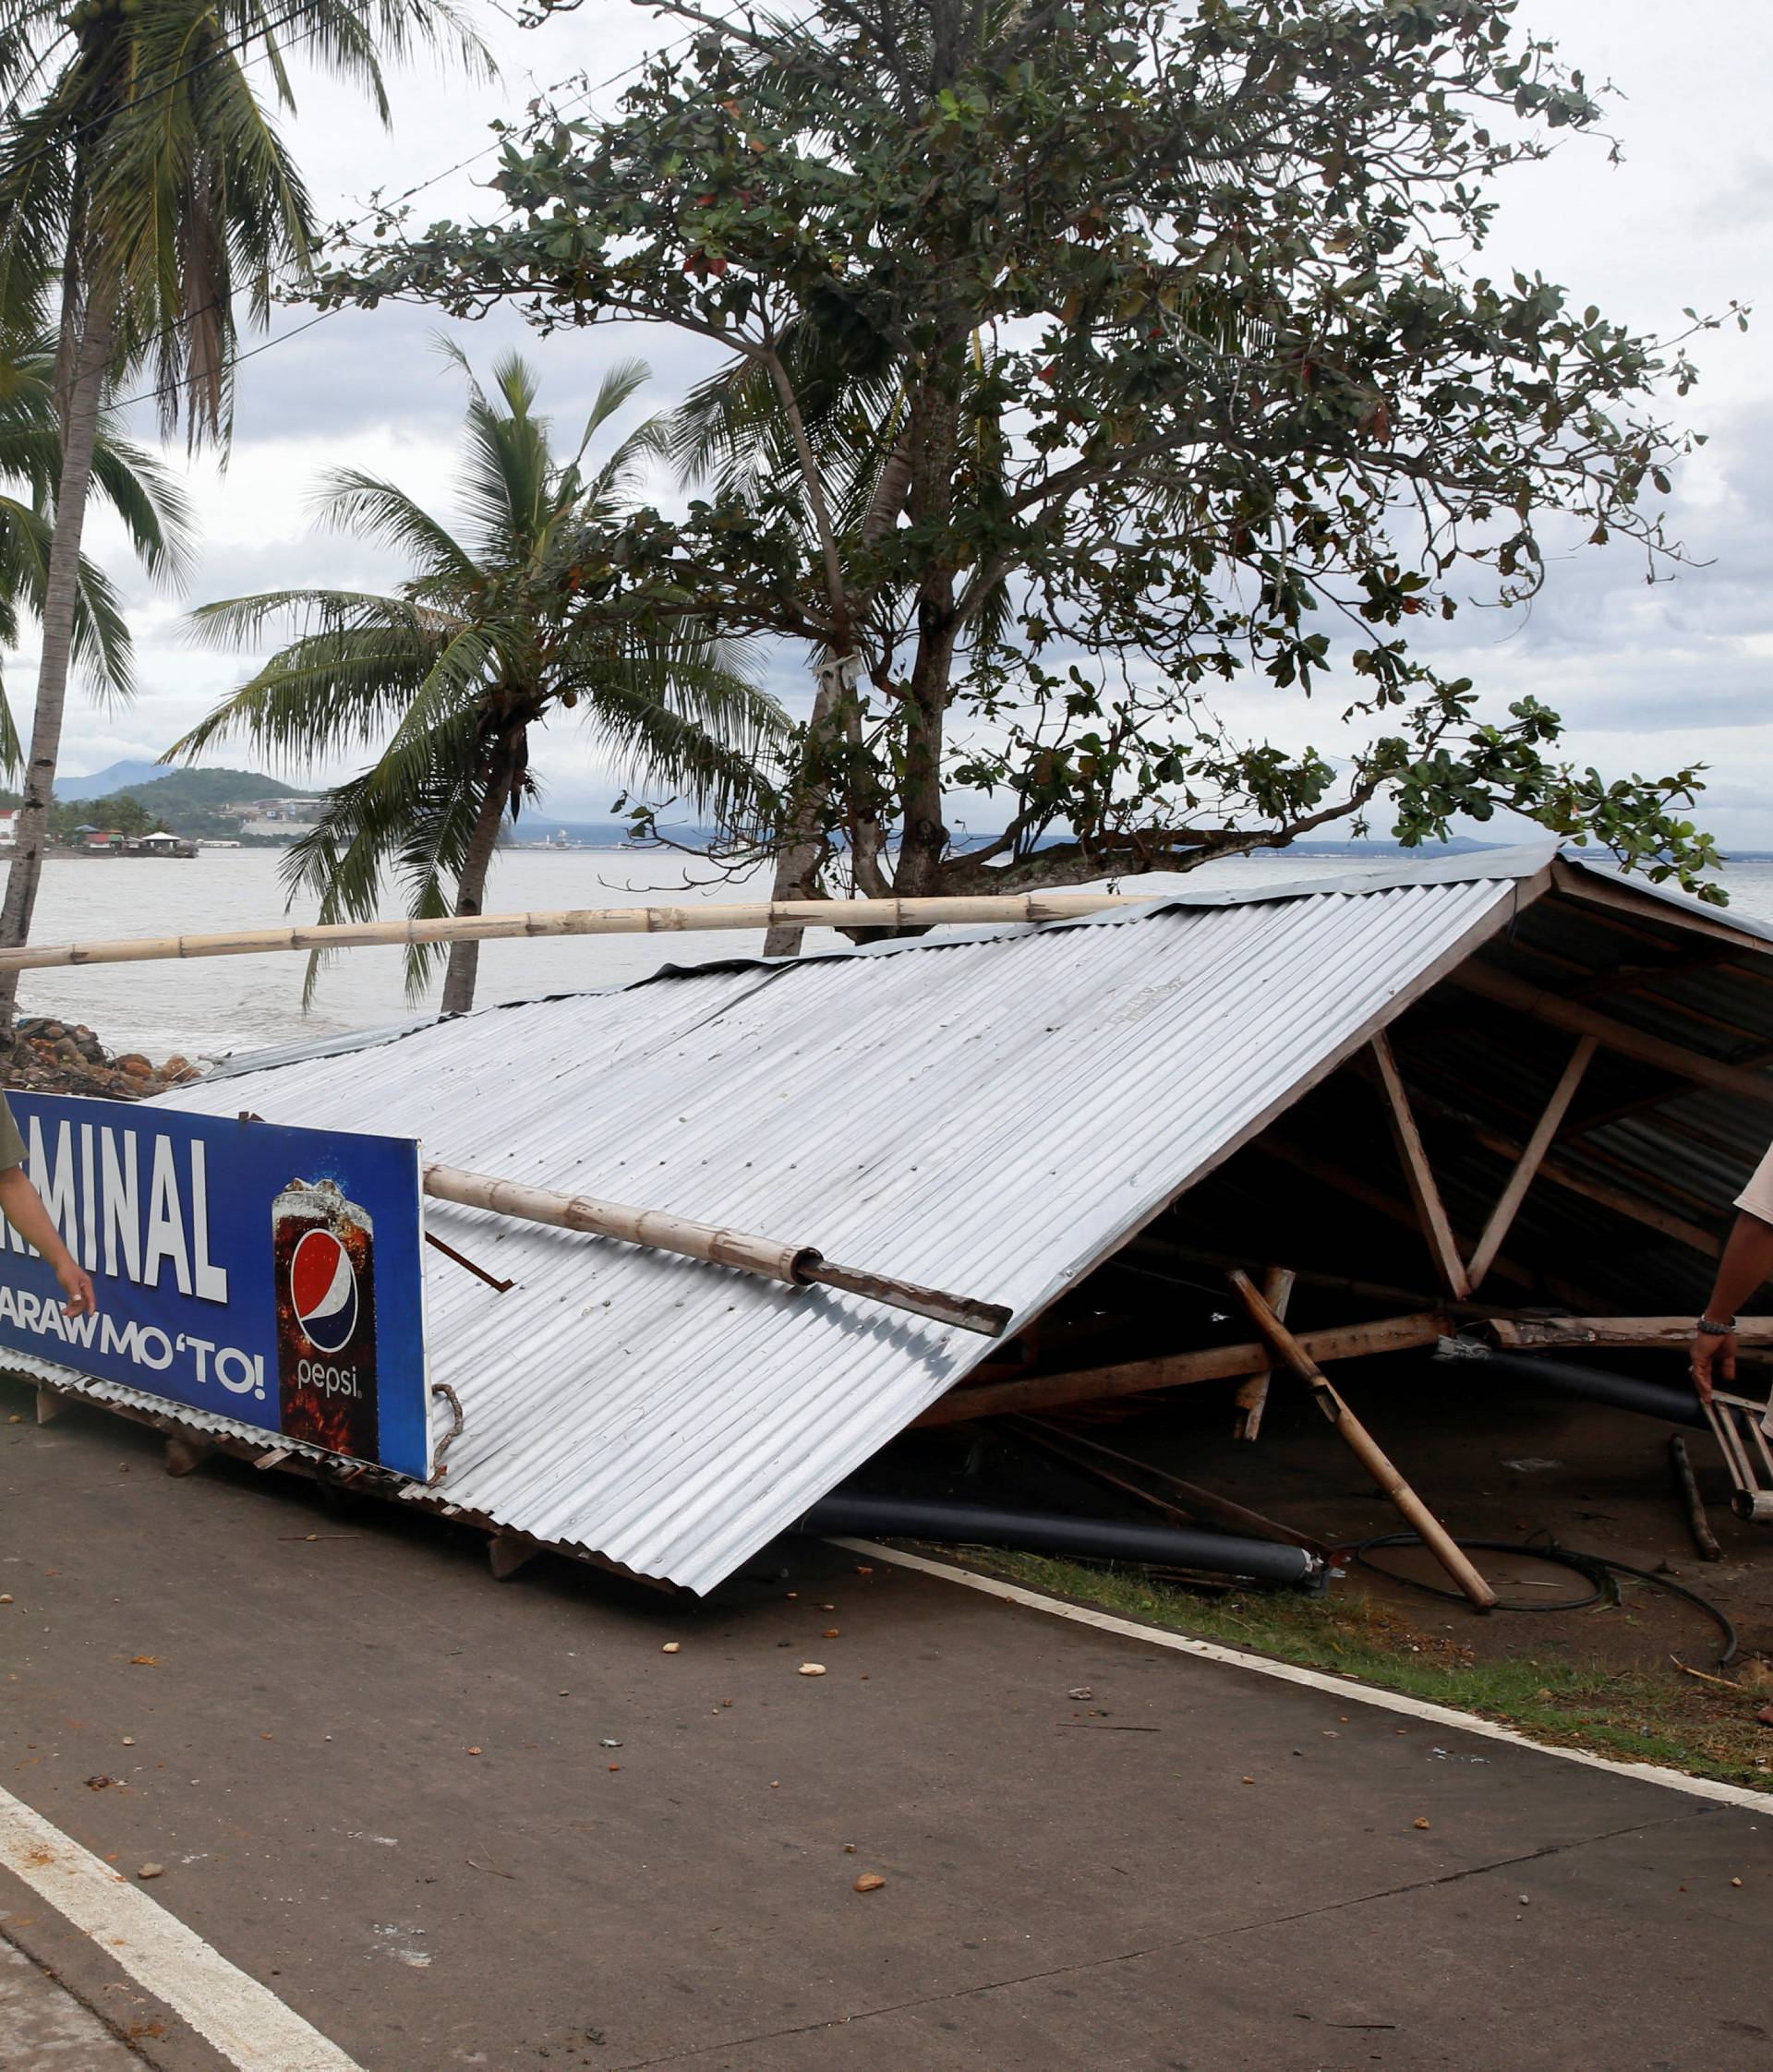 A passenger waiting shed is pictured after it was toppled by strong winds at the height of Typhoon Nock-Ten in Mabini, Batangas